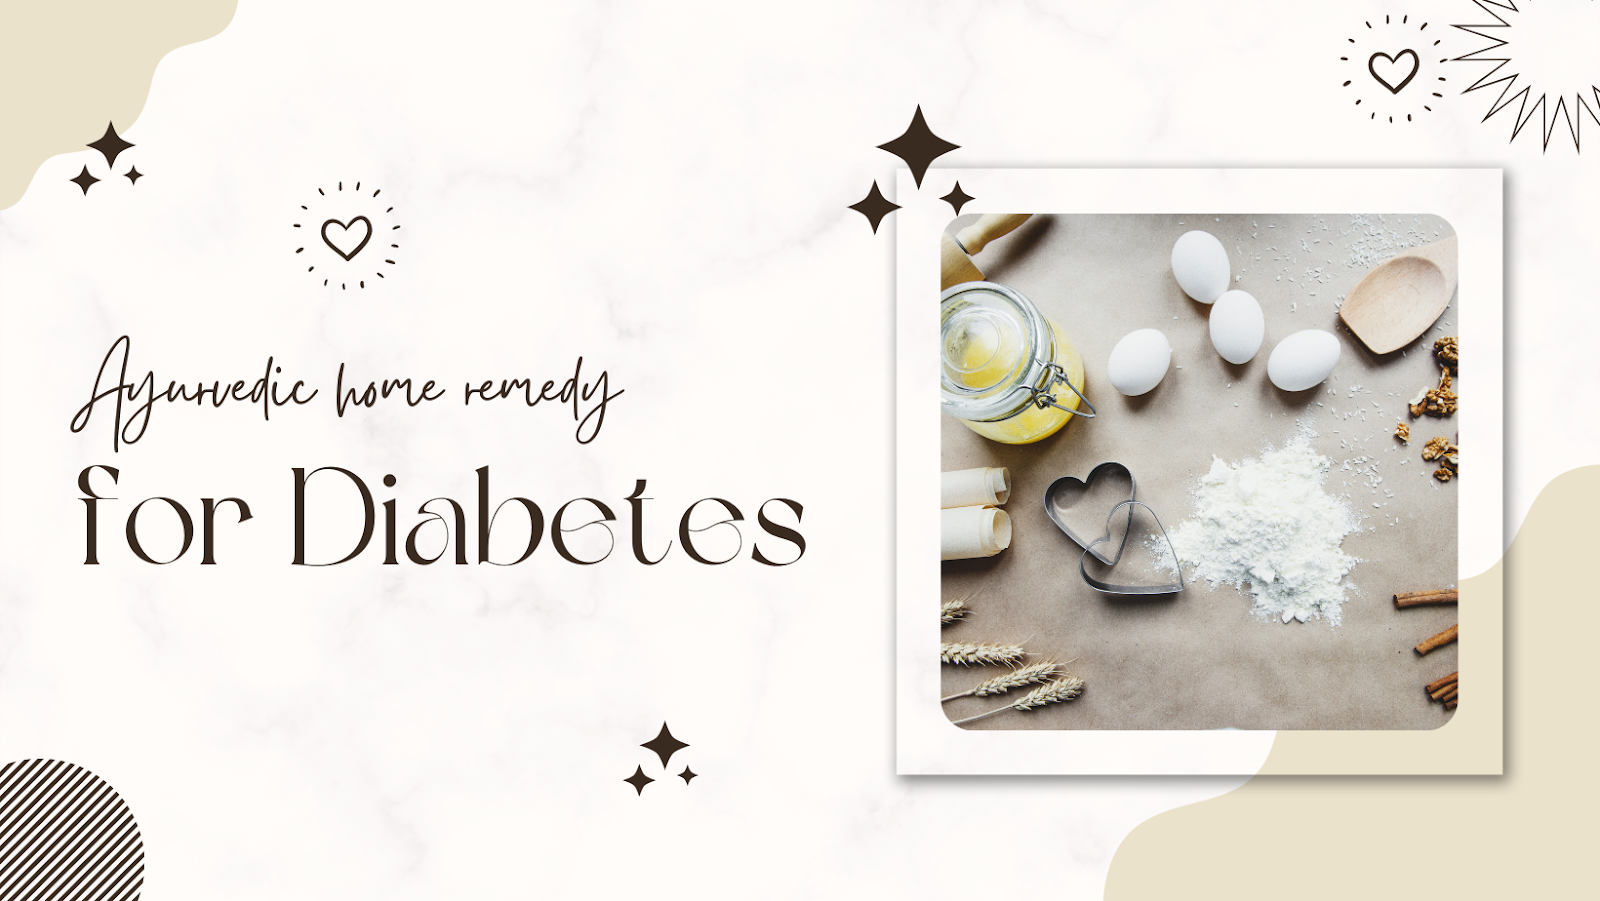 Ayurvedic home remedy for Diabetes 